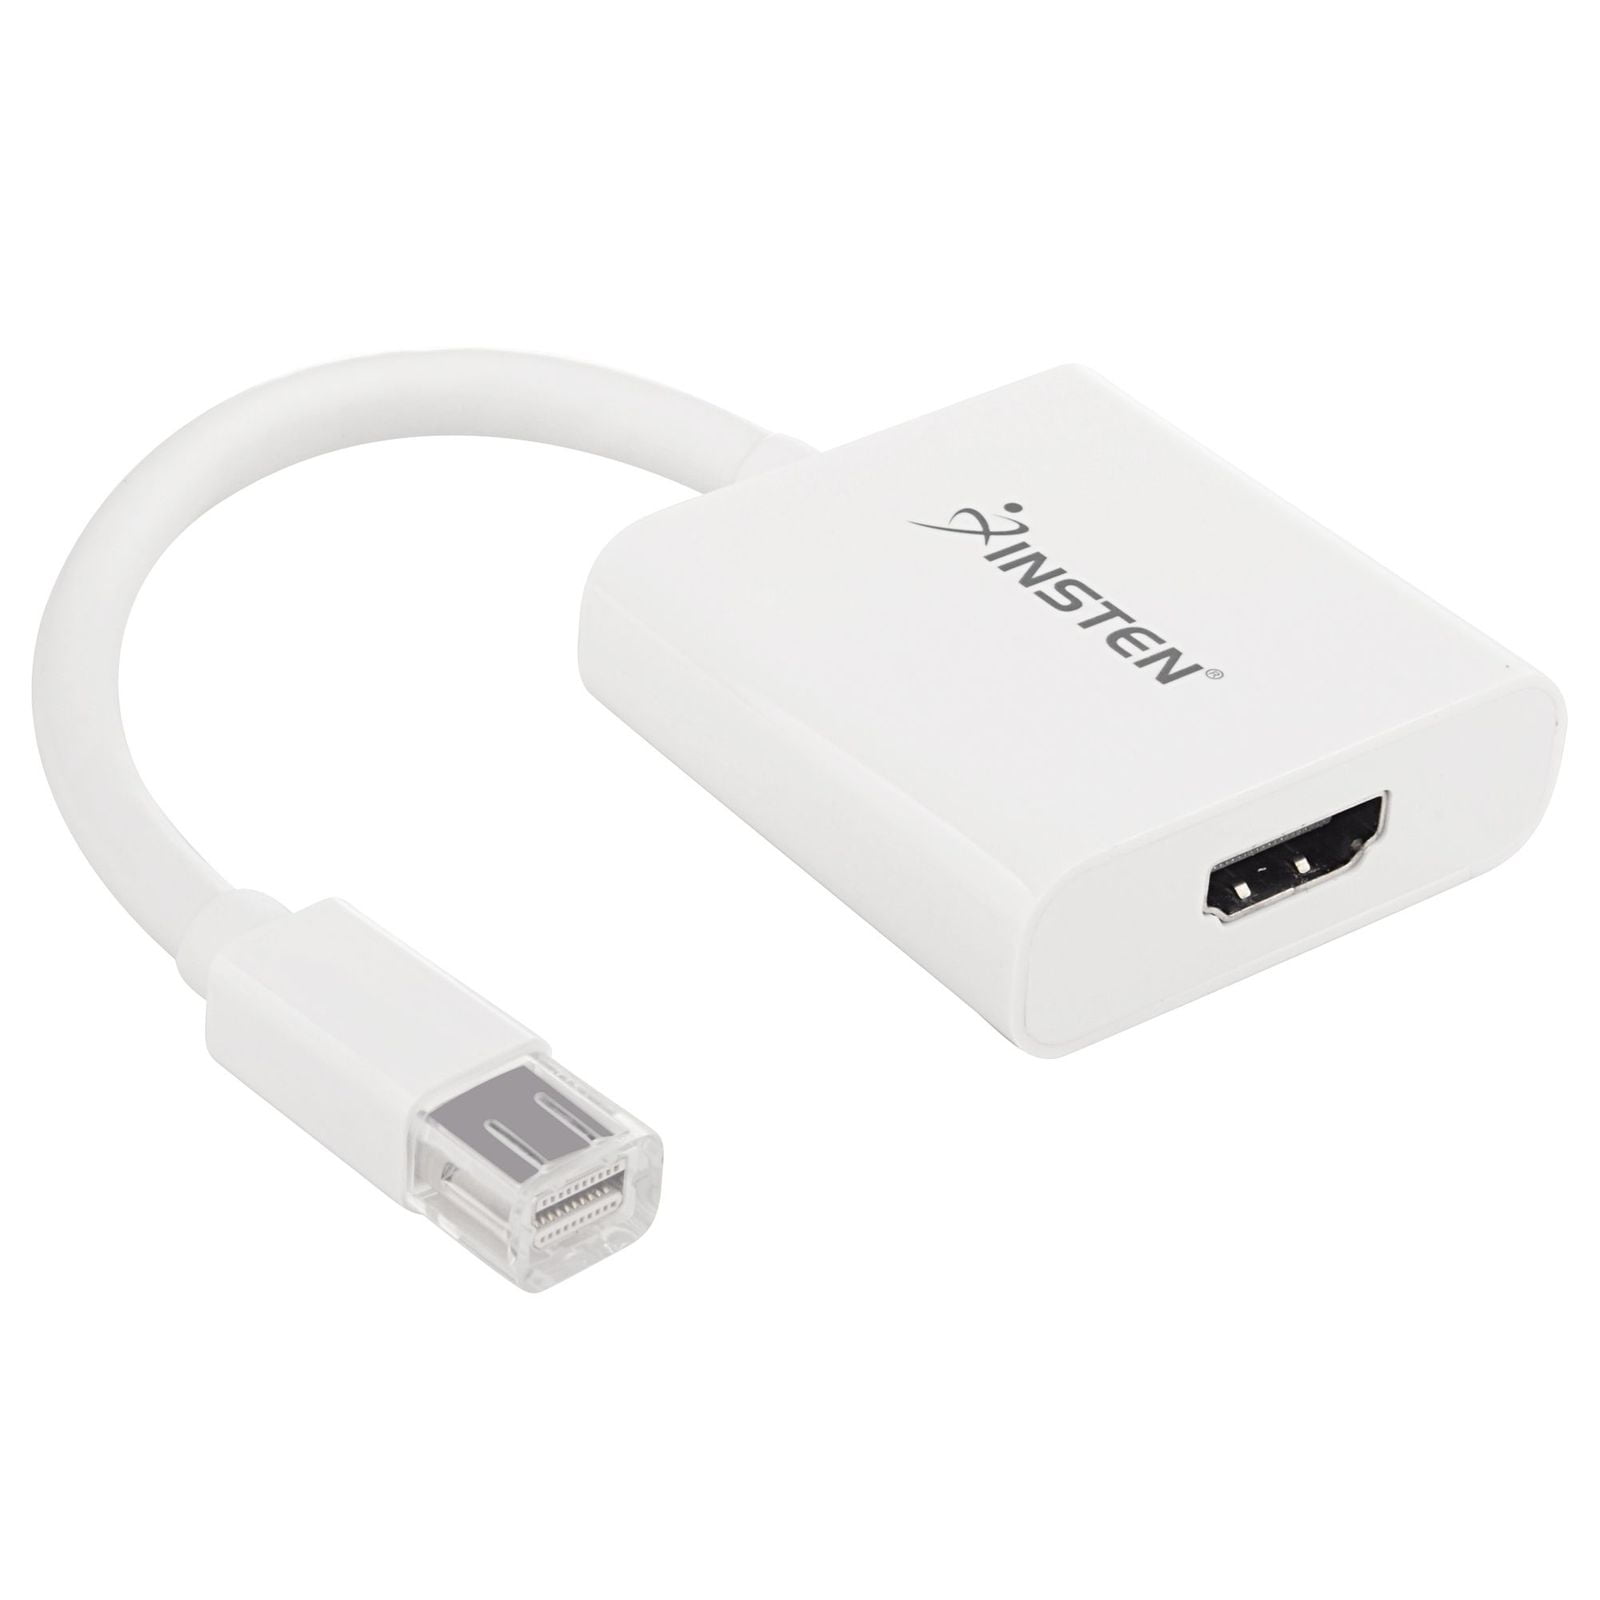 Connectors Mini DP to HDMI Cable Converter Adapter Mini DisplayPort Display Port DP to HDMI Adapter for Apple Mac MacBook Pro Air Notebook Cable Length White 